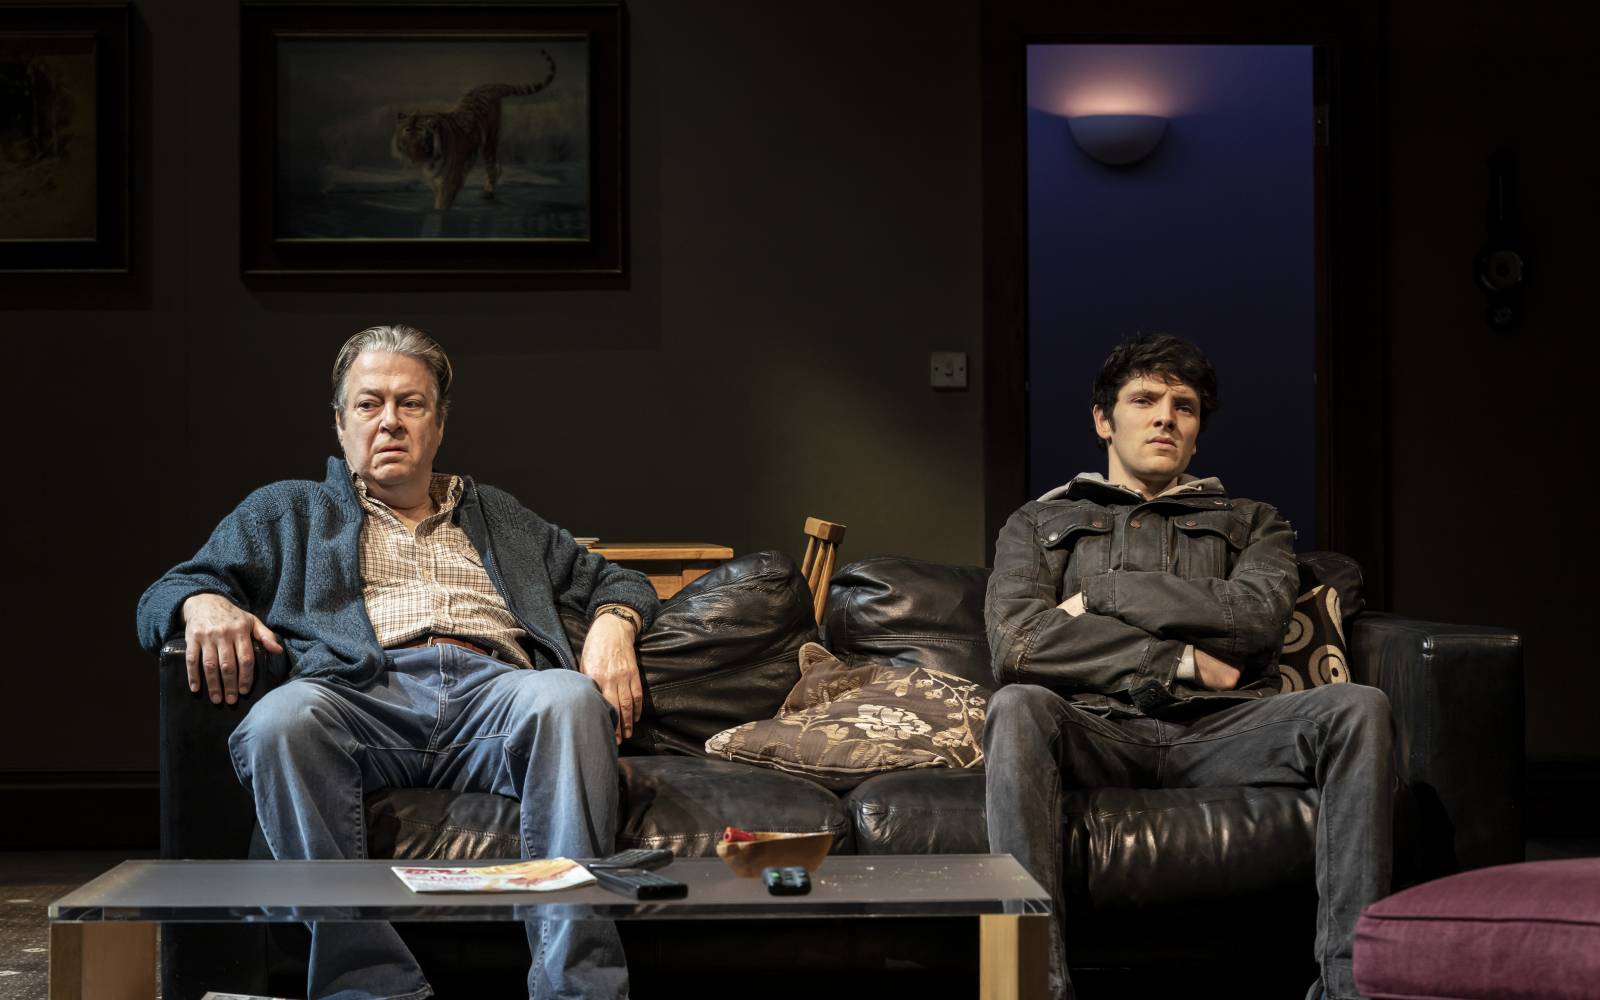 Roger Allam (father) and Colin Morgan (son) sit on a sofa, leaving space between them. They look unhappy